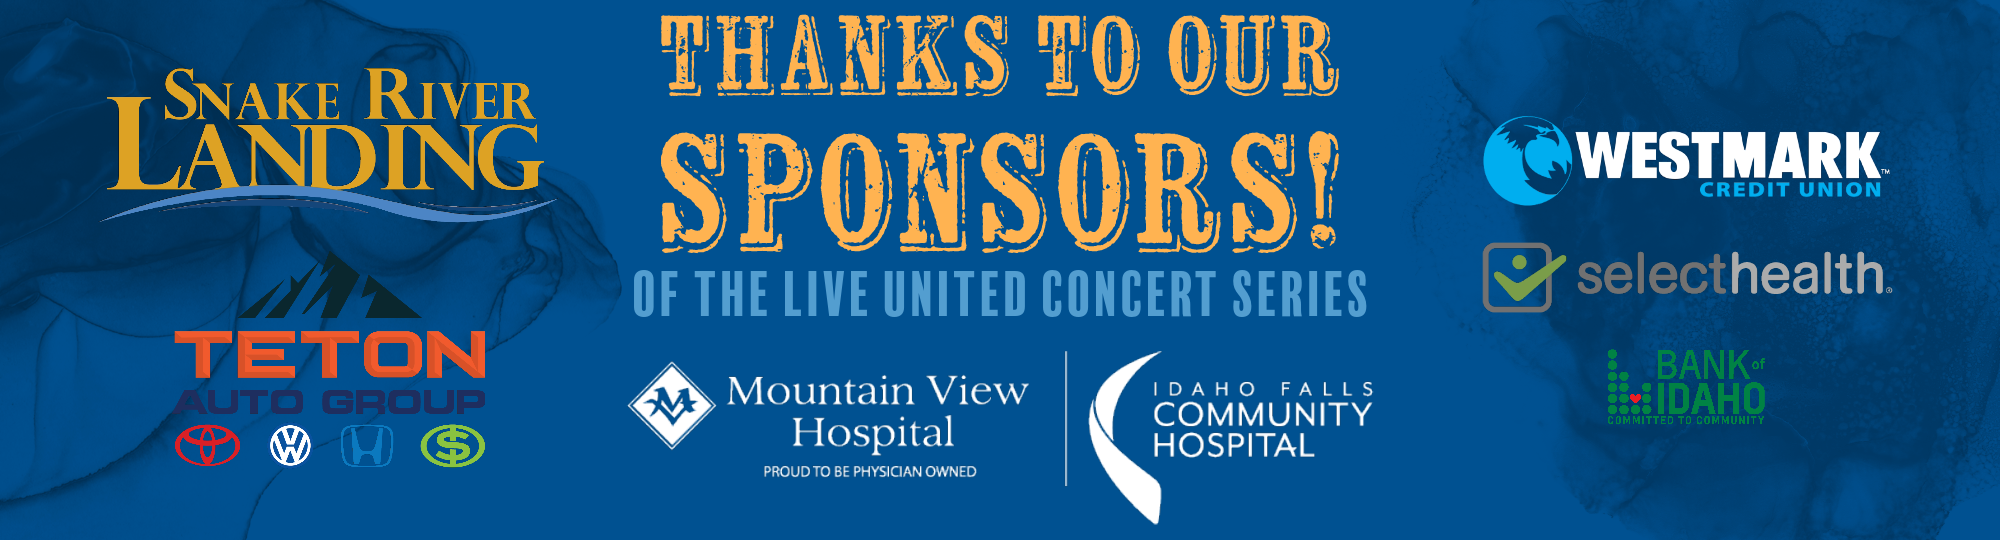 We thank our sponsors of the Live United concert series.